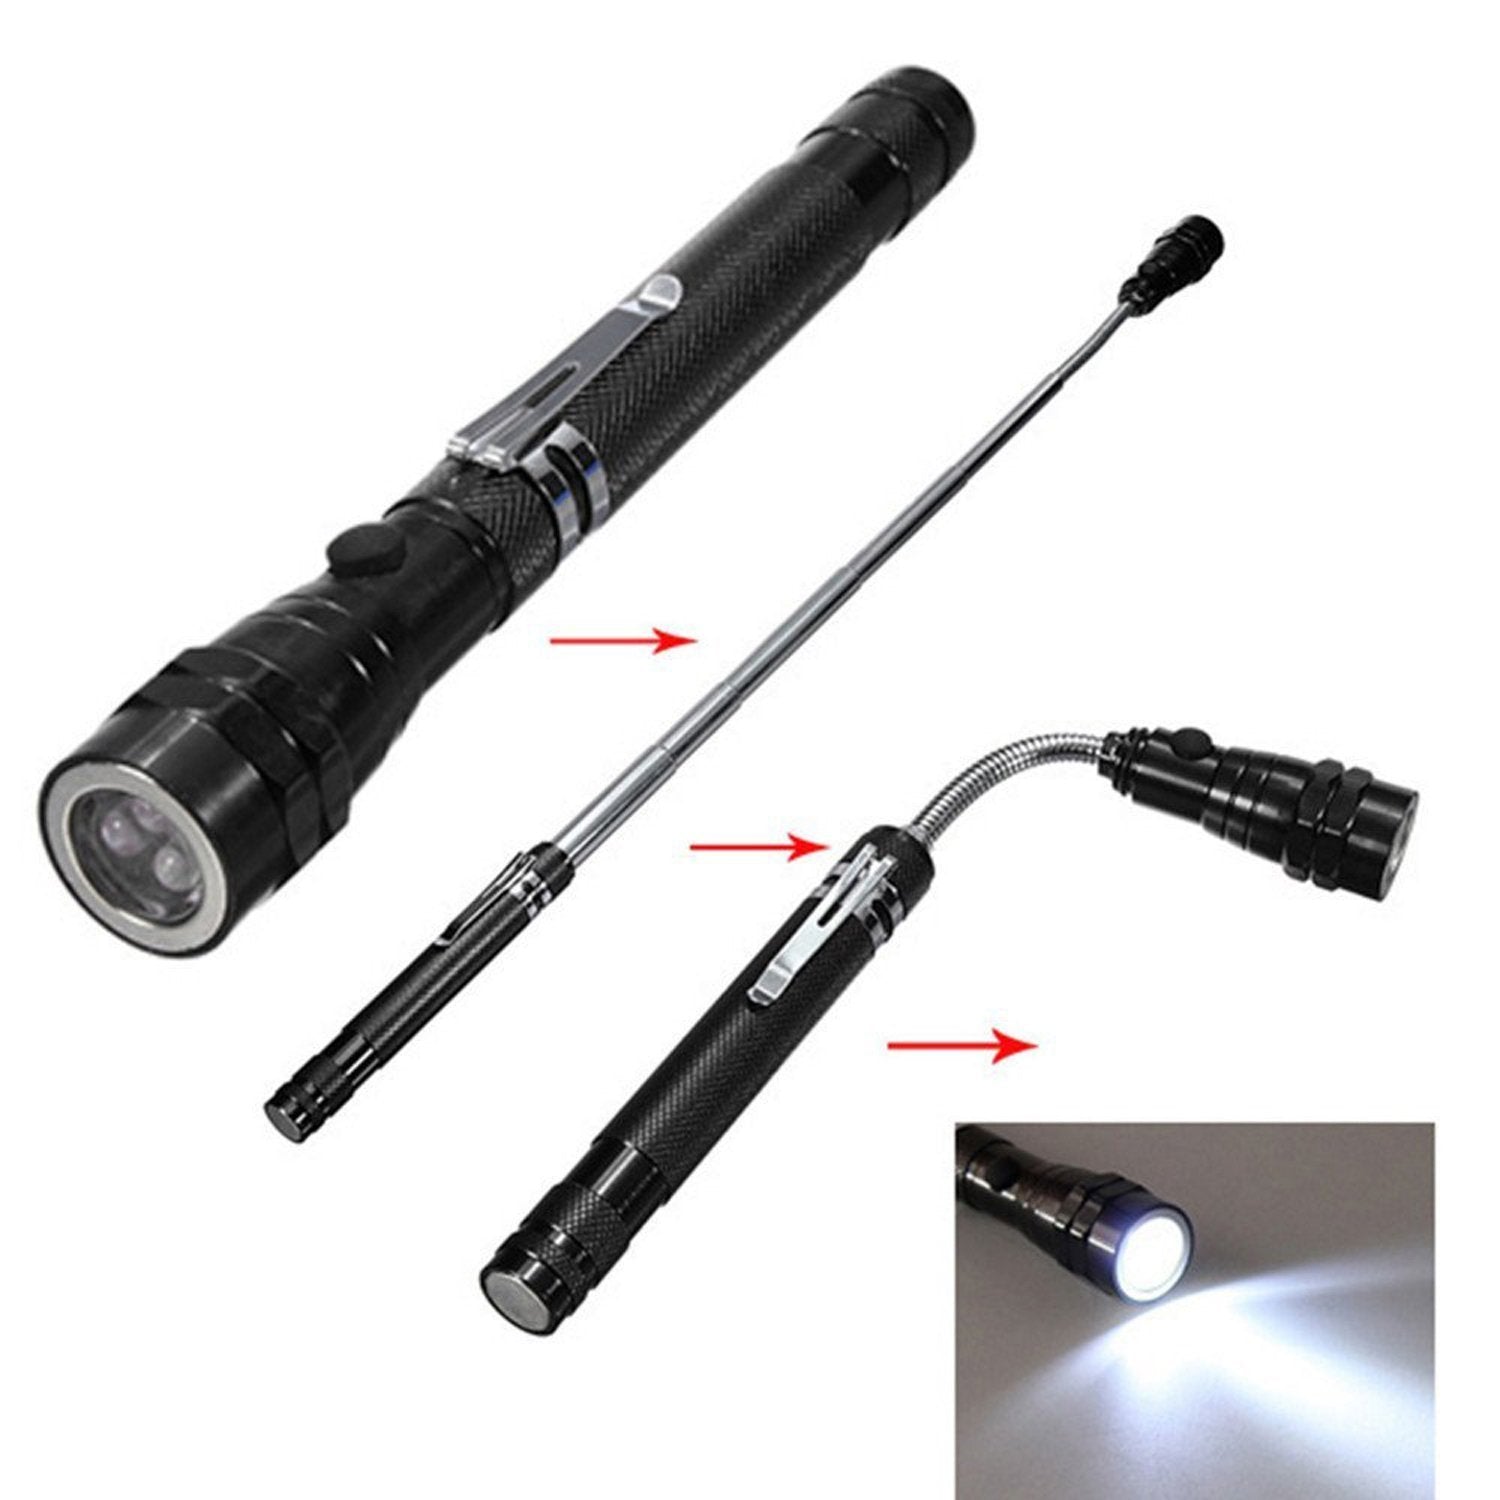 Telescopic LED Extendable Torch With Magnetic Head (Multicolor)